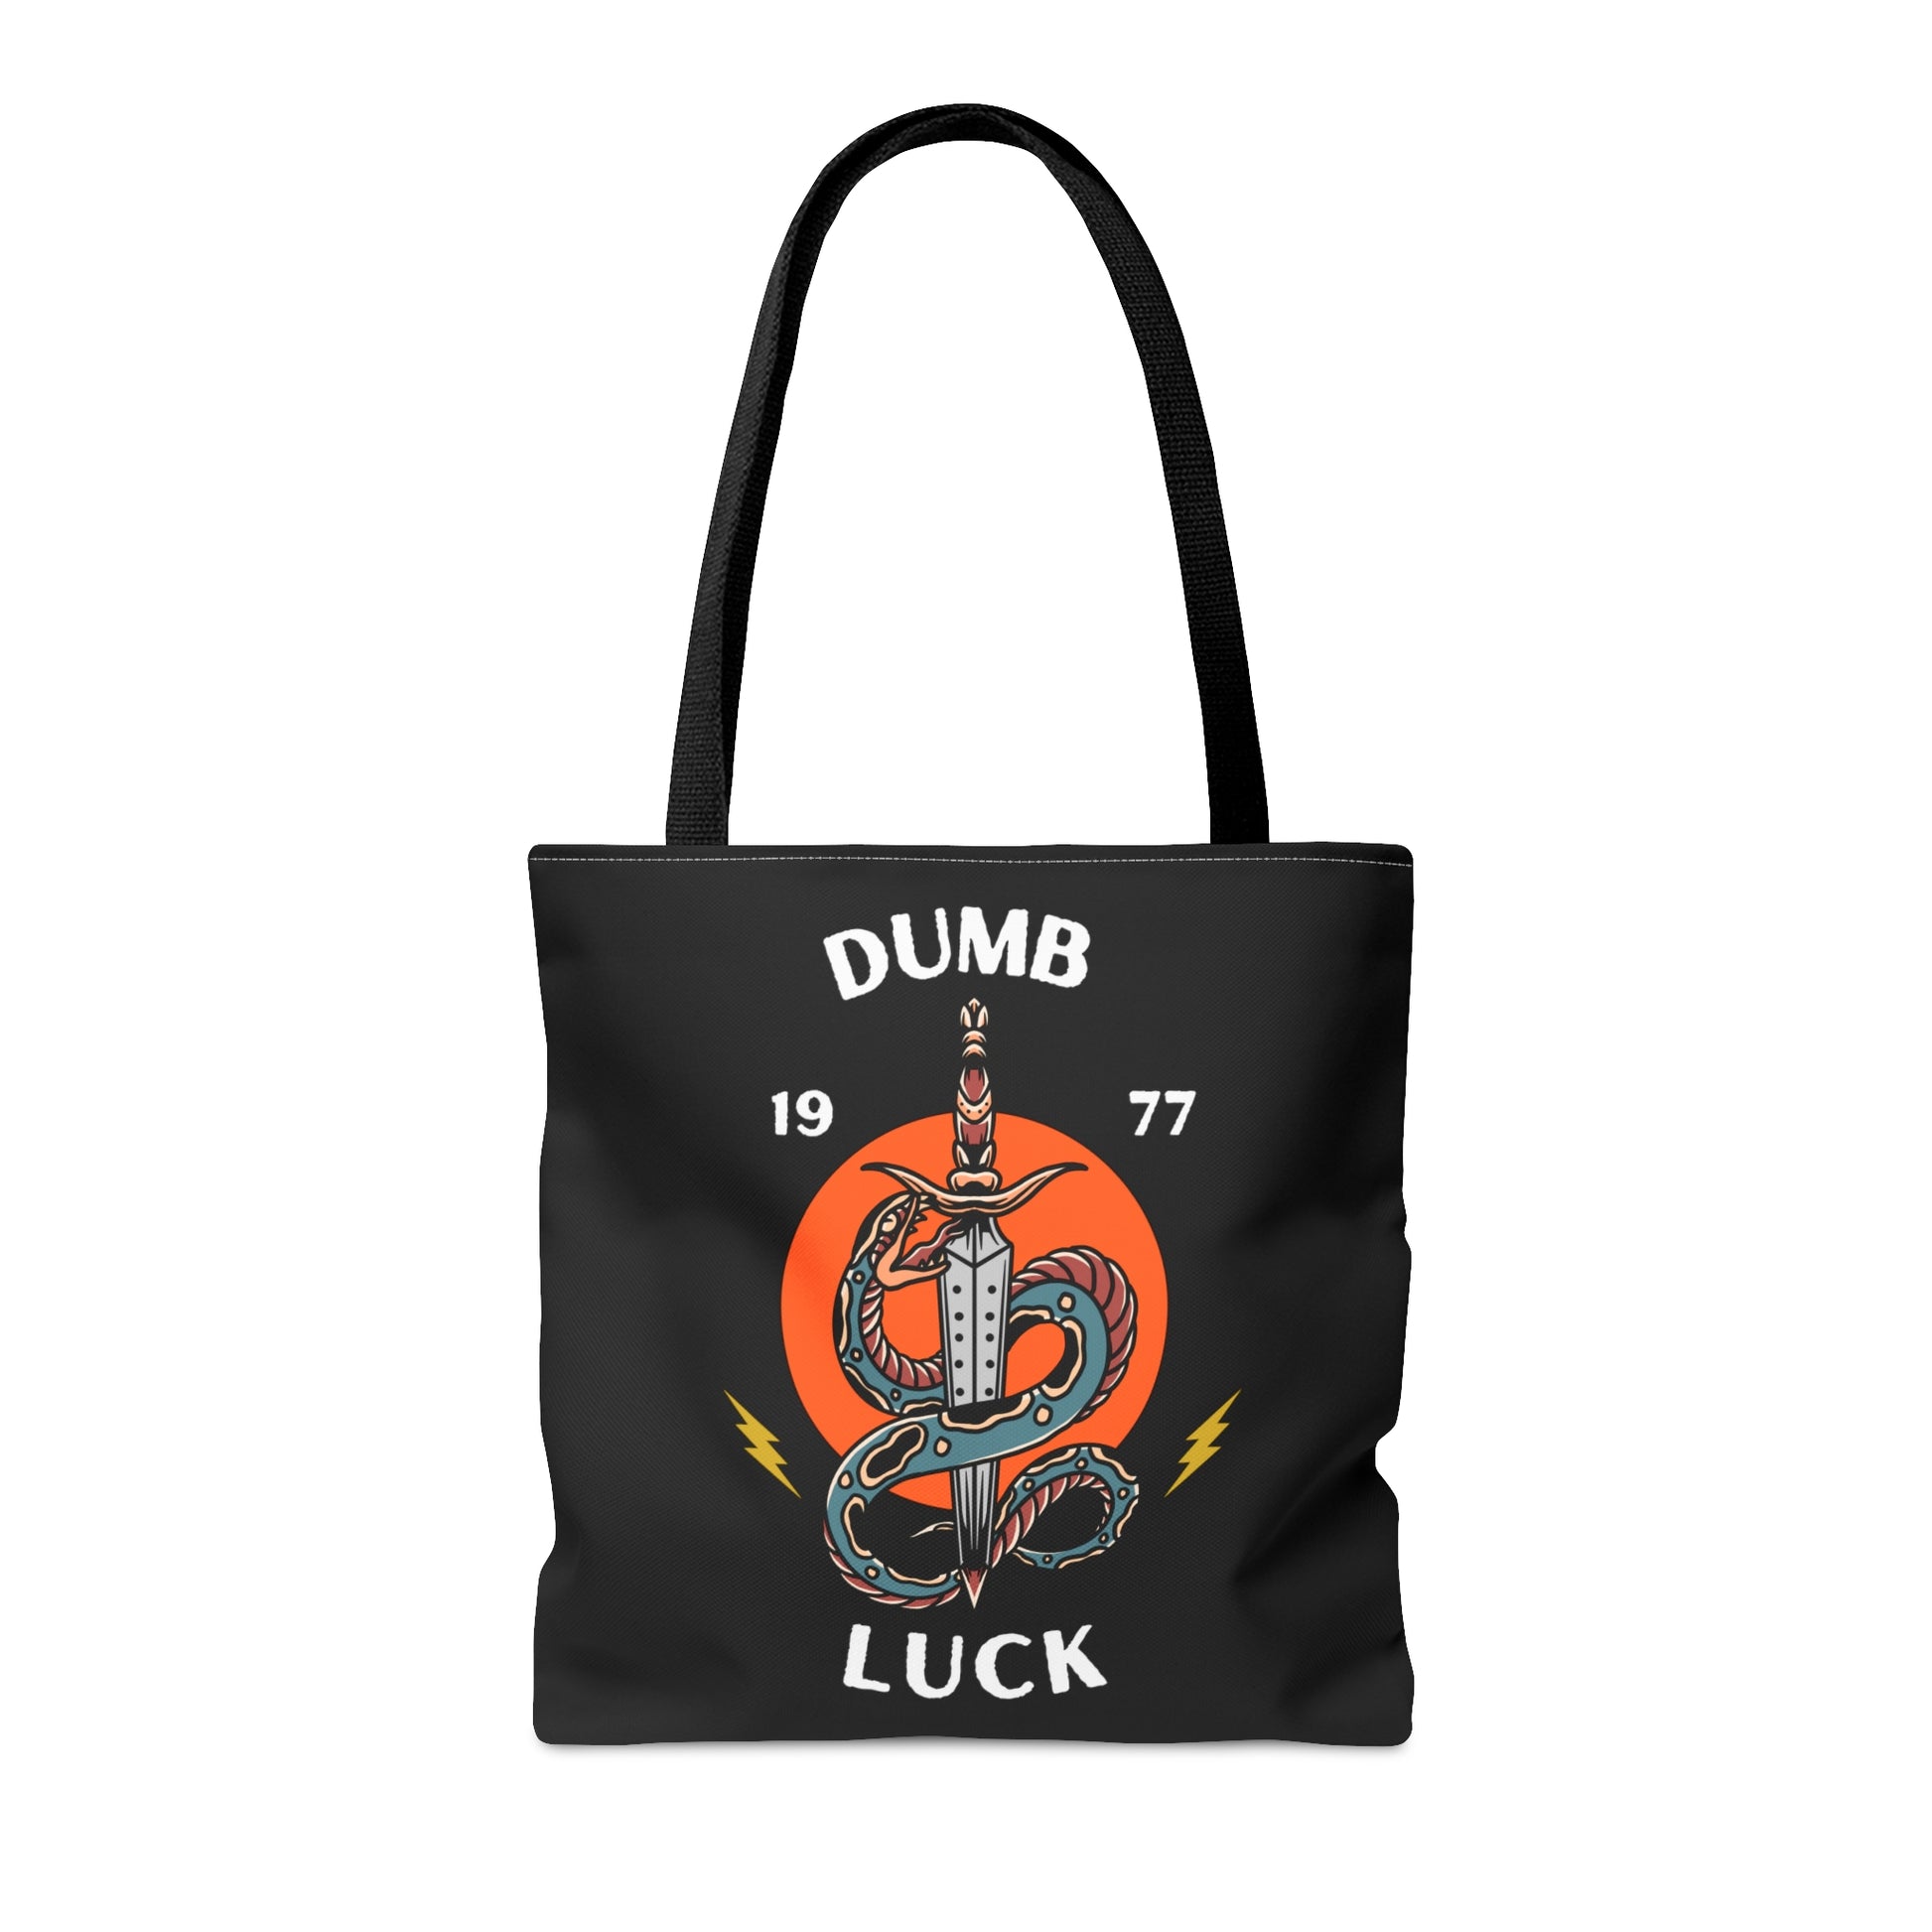 Dumb Luck Snake and Dagger Tattoo Tote Bag in Black / Vintage American Old School Traditional Tattoo / Punk Rock Alternative Beach - Foxlark Crystal Jewelry